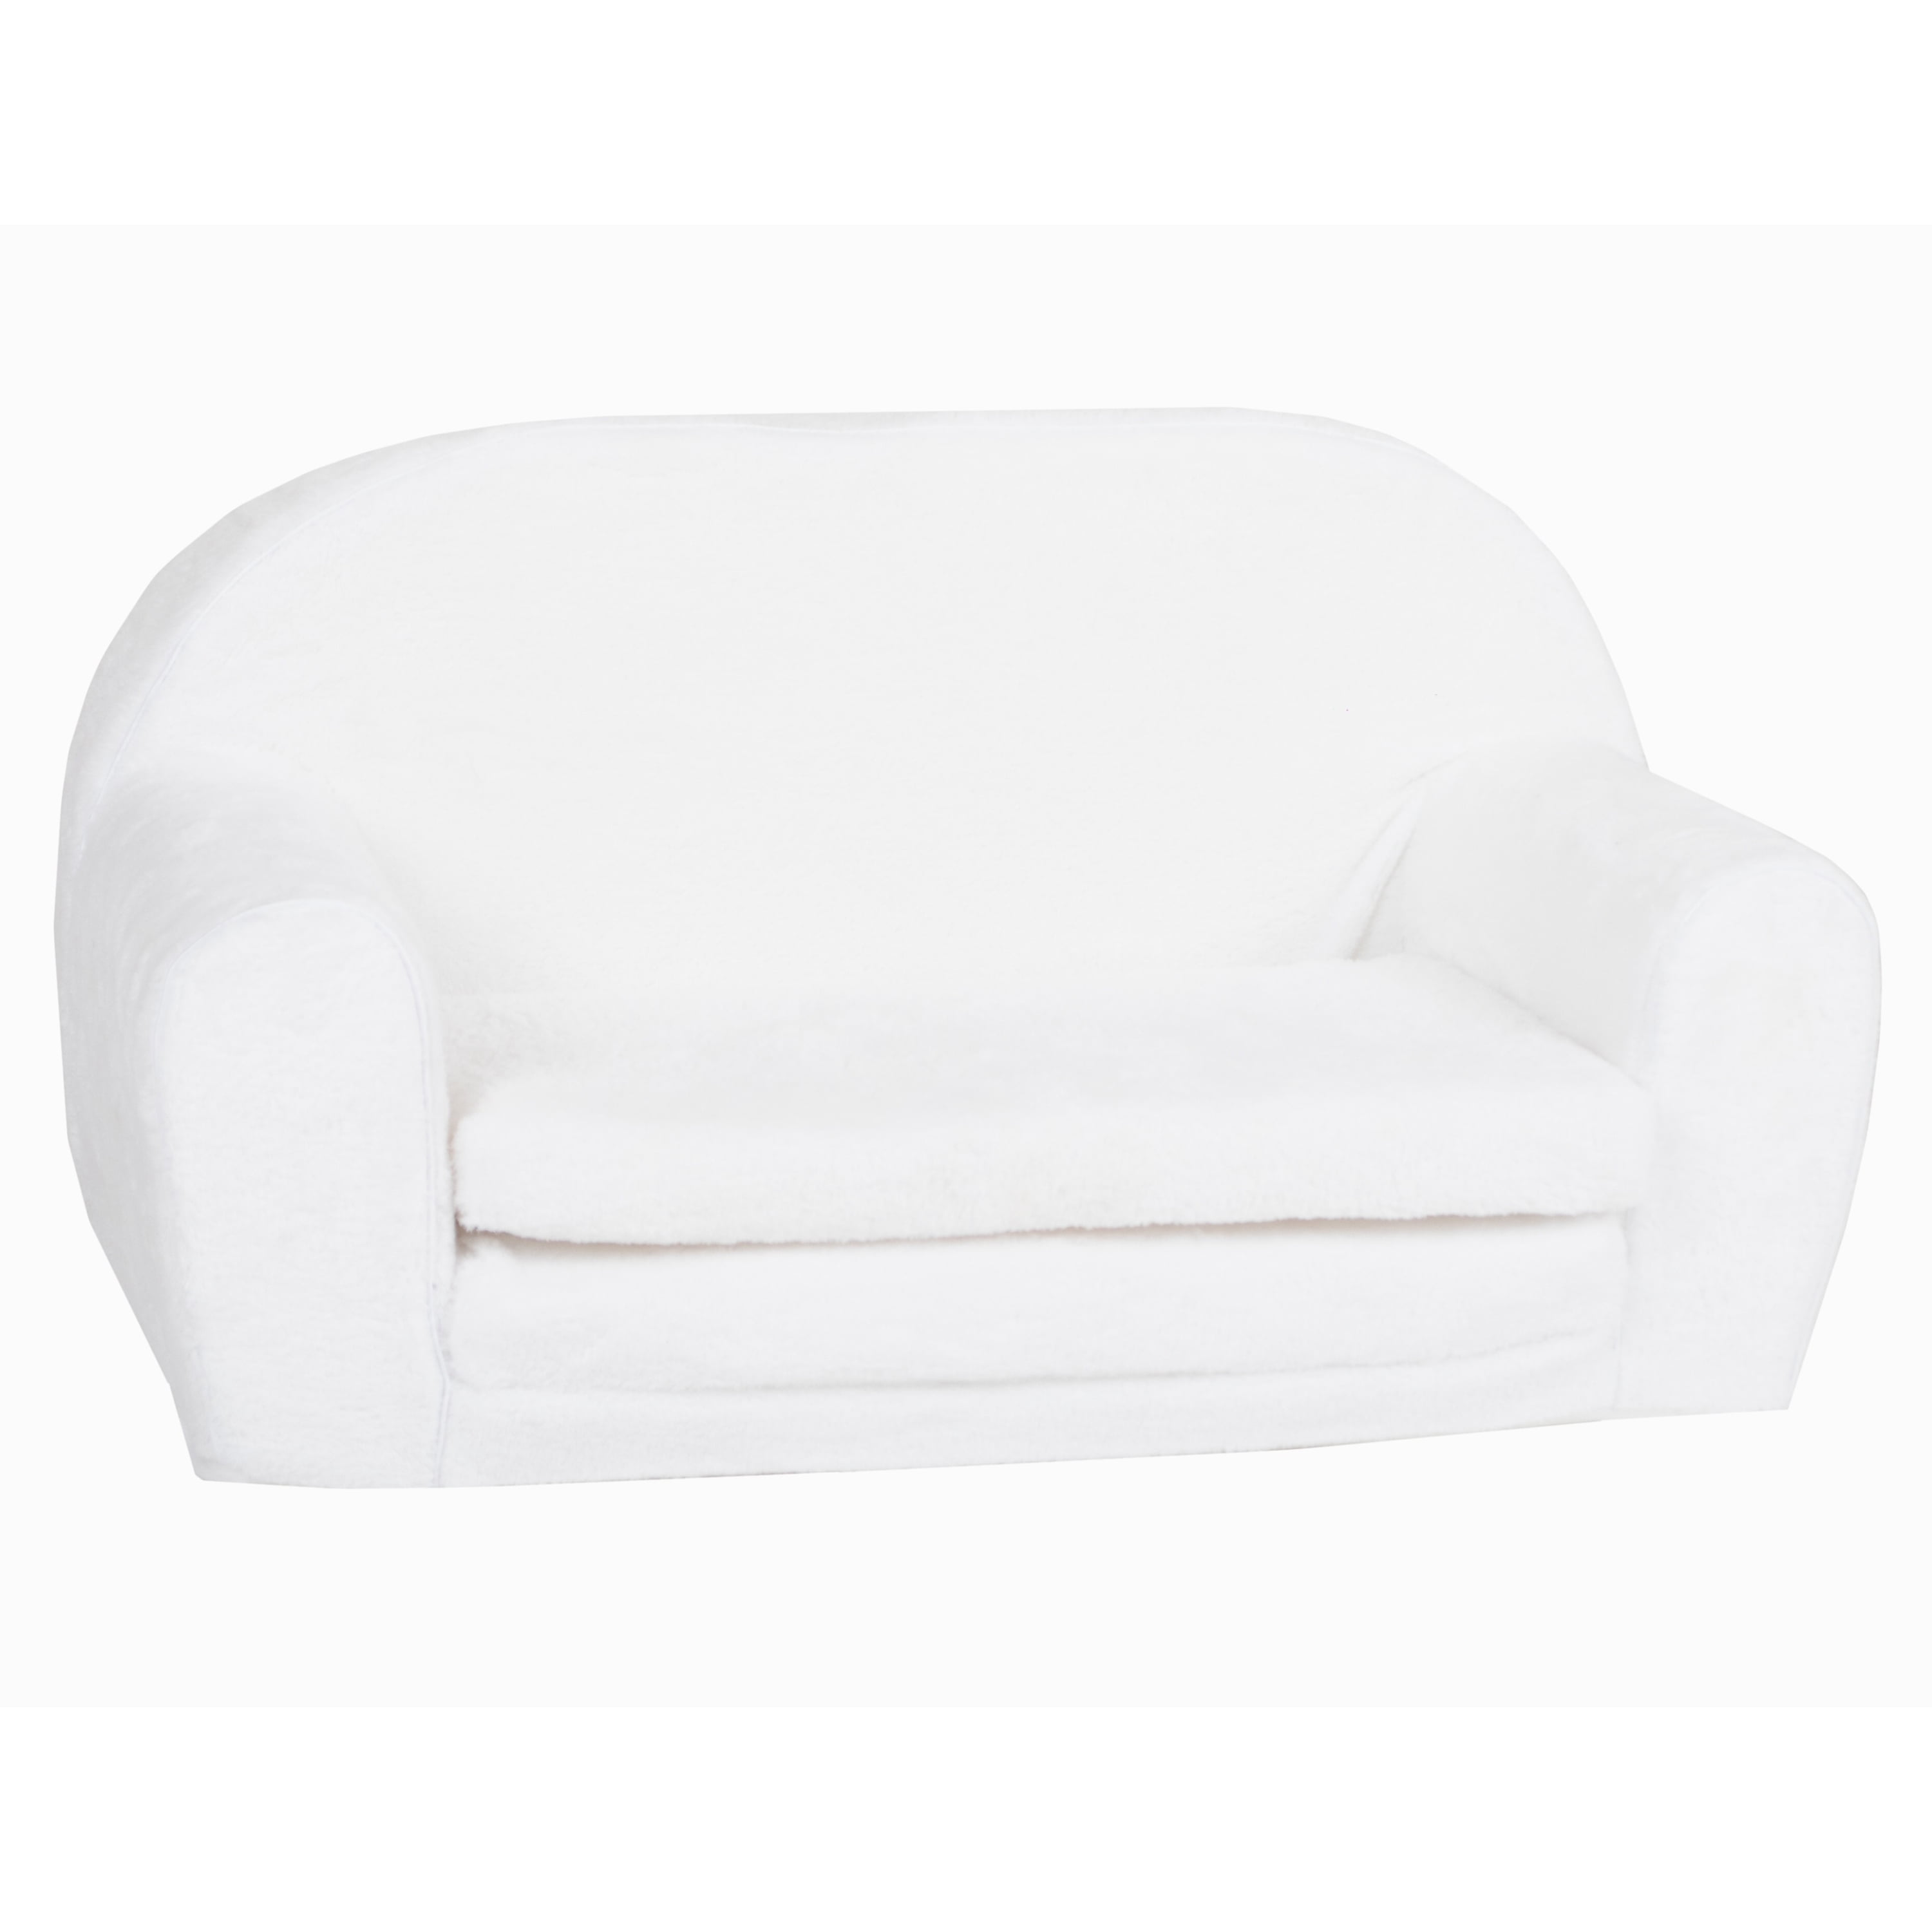 Couch 2 - Couch Made - (White Sofa, European Kids Flip DELSIT & Kids Kids Lounge fold Sofa Double - Comfy Out Fur) Sofa Children\'s Folding Faux Toddler Foam Open 1 in